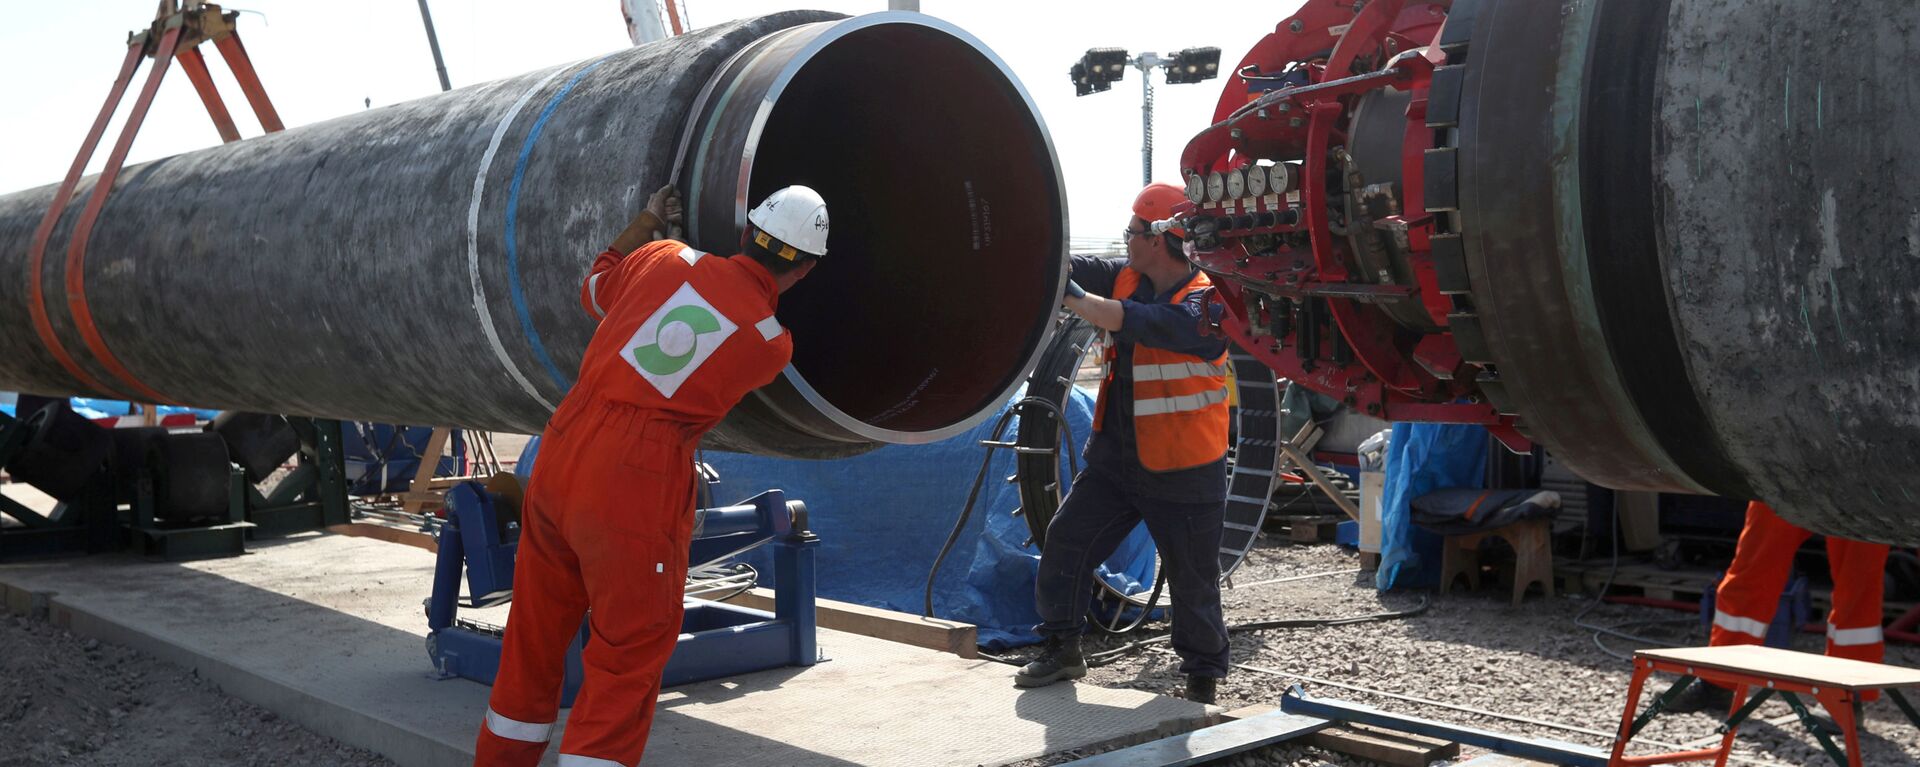 FILE PHOTO: FILE PHOTO: Workers are seen at the construction site of the Nord Stream 2 gas pipeline, near the town of Kingisepp, Leningrad region, Russia, 5 June 2019 - Sputnik International, 1920, 13.03.2021